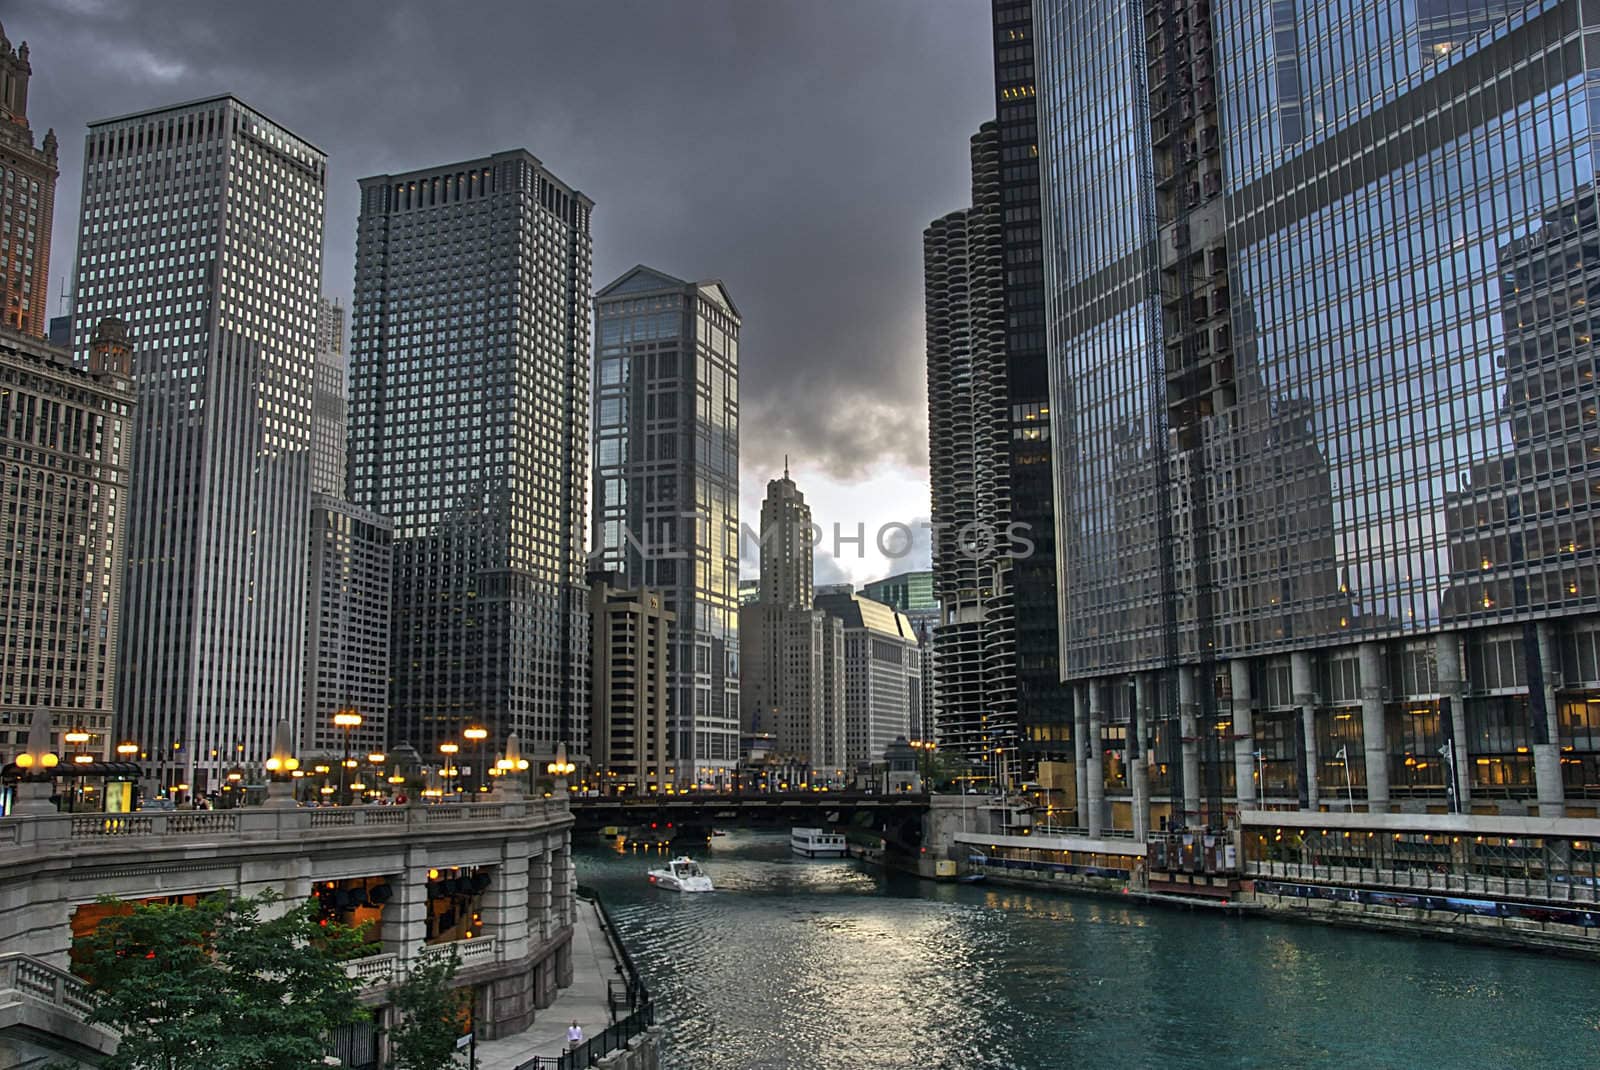 View of Chicago River in Chicago.